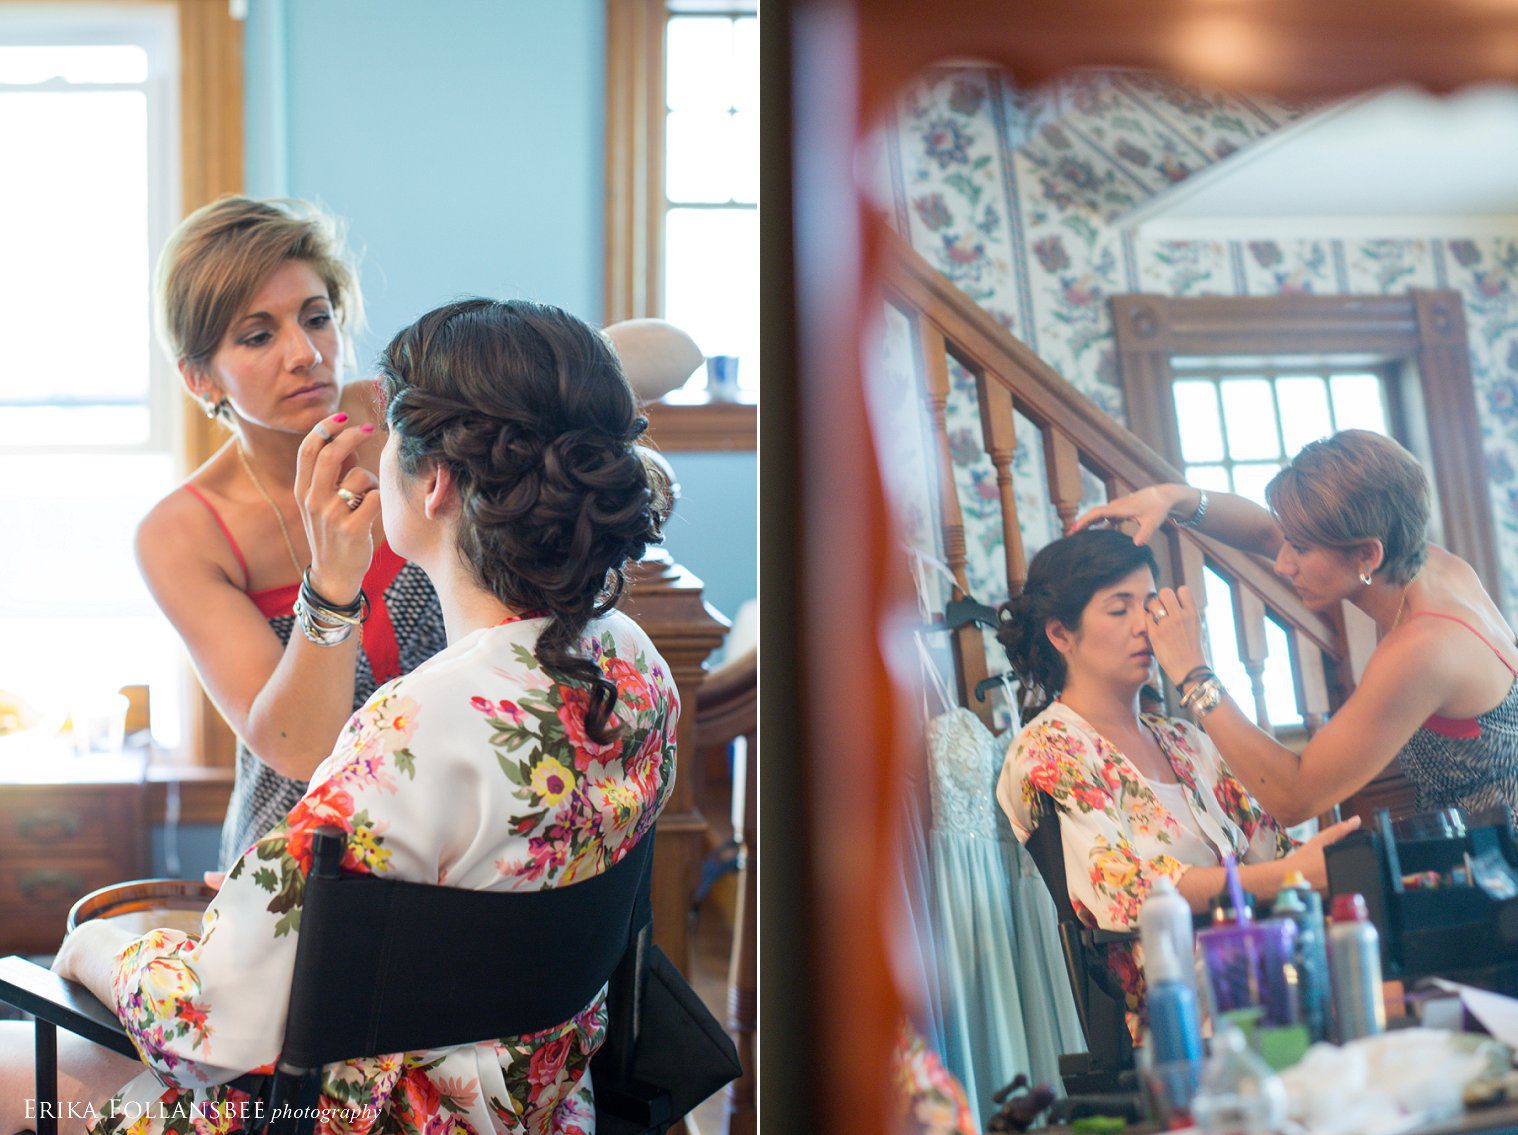 Jessica and Zach's summer wedding at The Fells in Newbury, NH